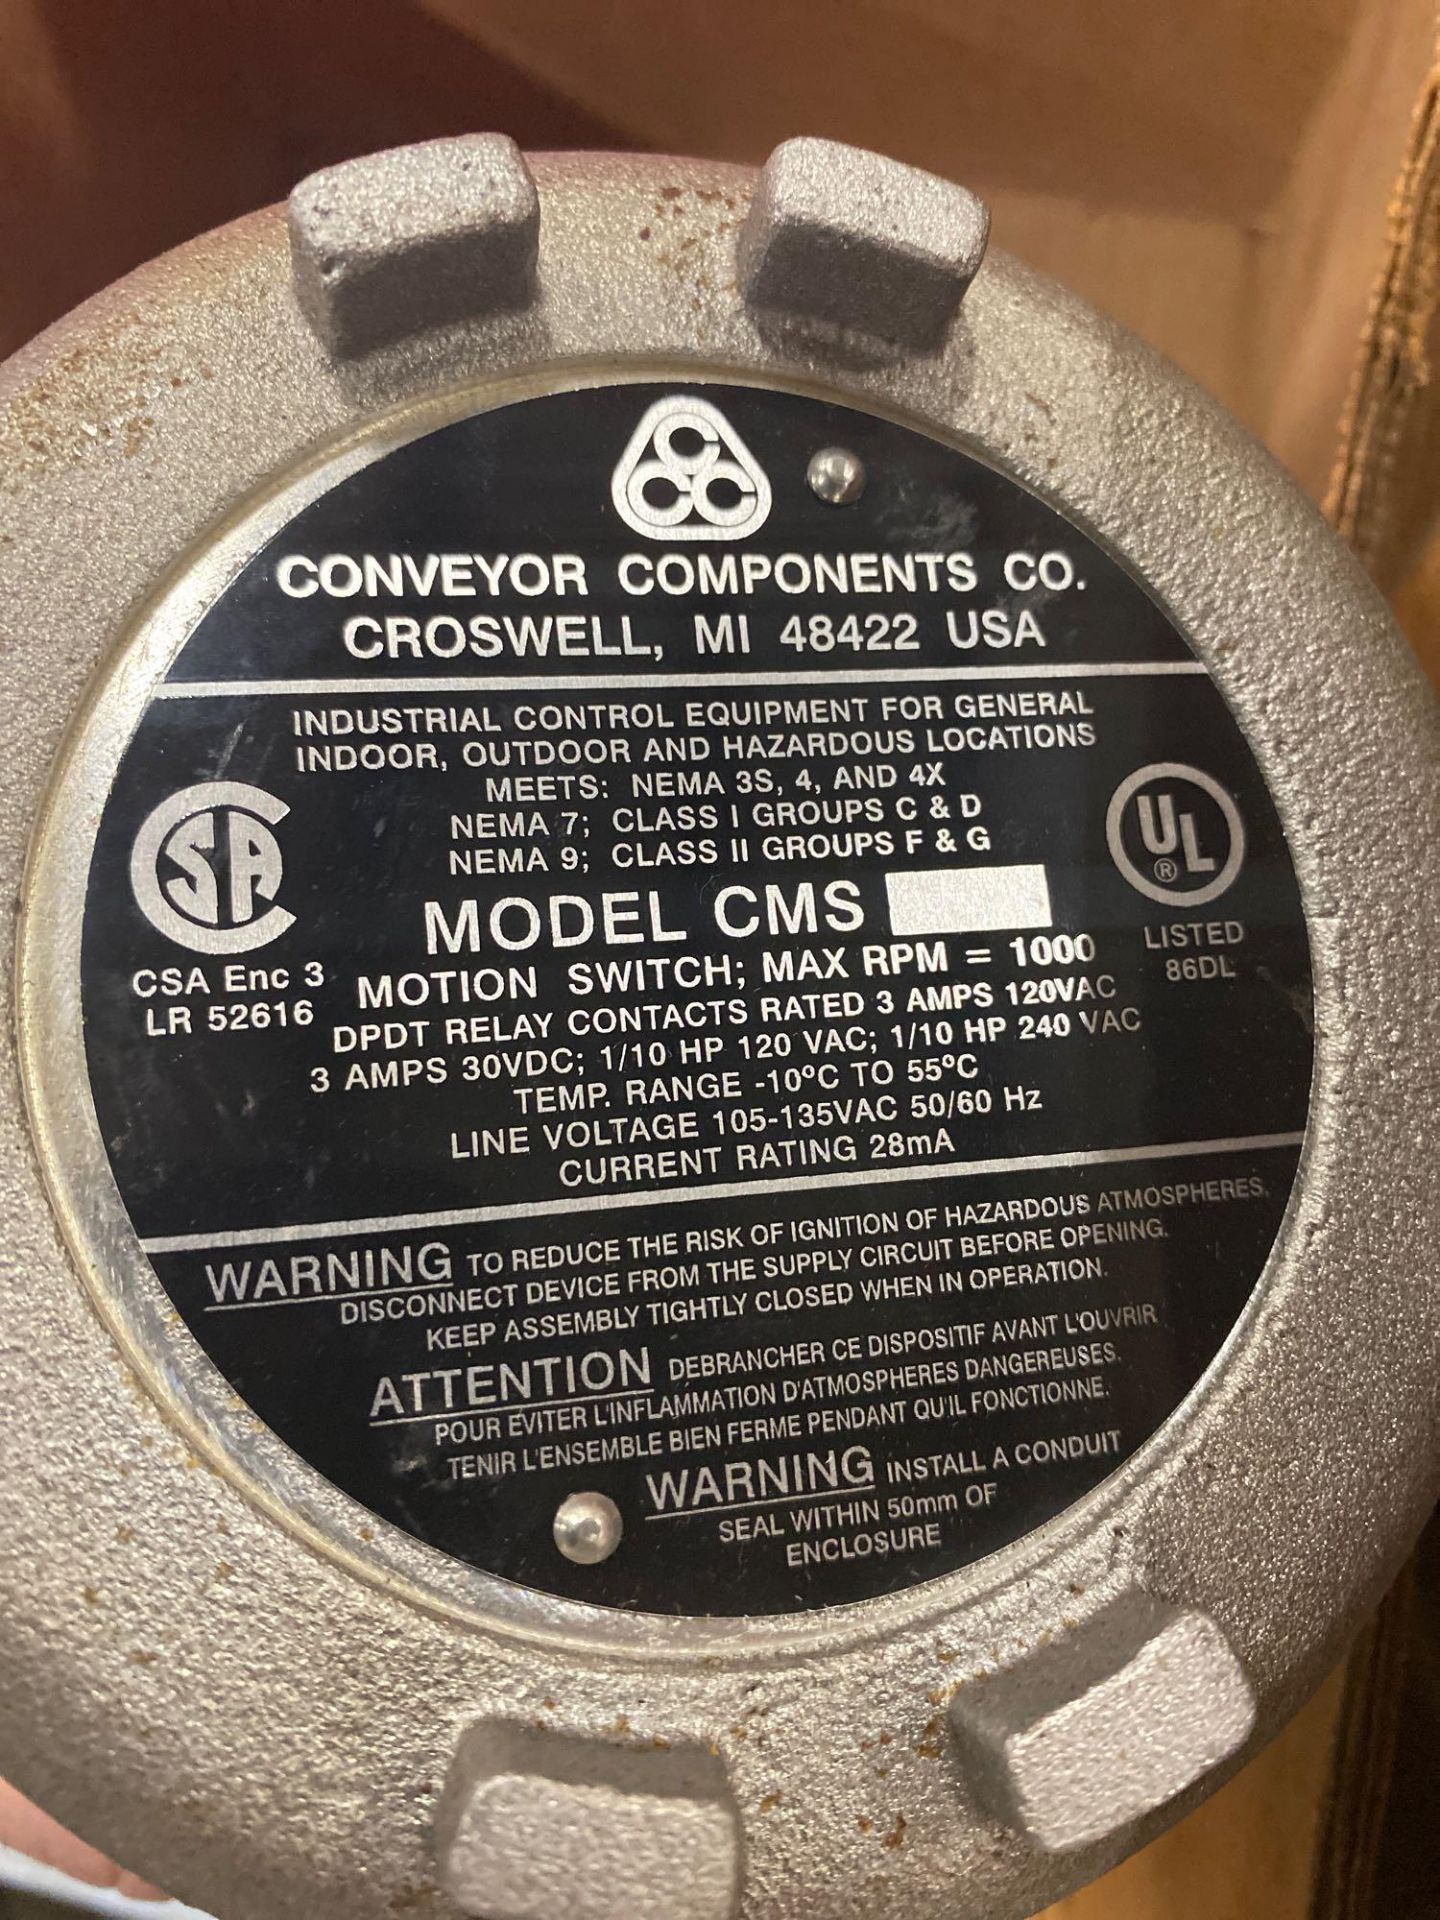 Conveyor Components model CMS controller. New with minor shelf wear. - Image 3 of 3